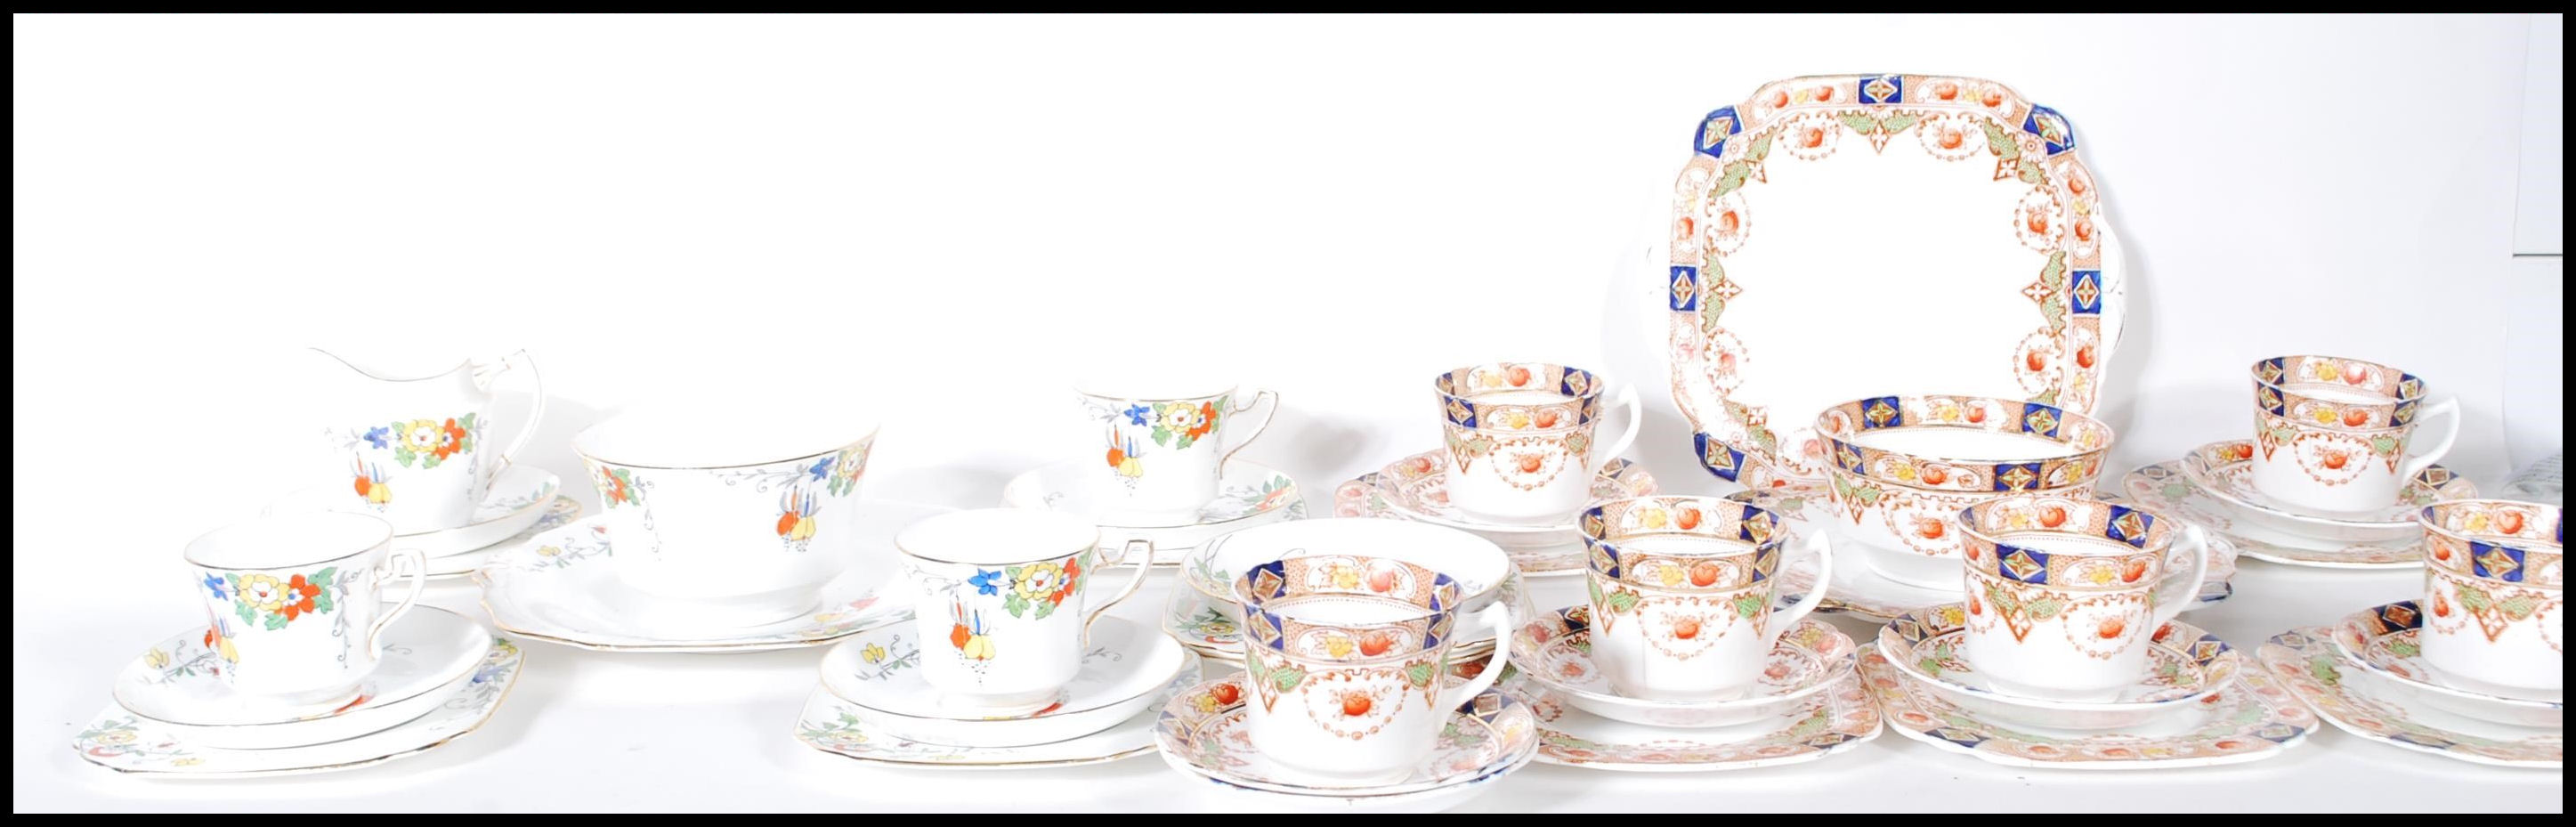 A set of 1930's Art Deco Sampson Smith Wetley China part tea service in a wisteria pattern